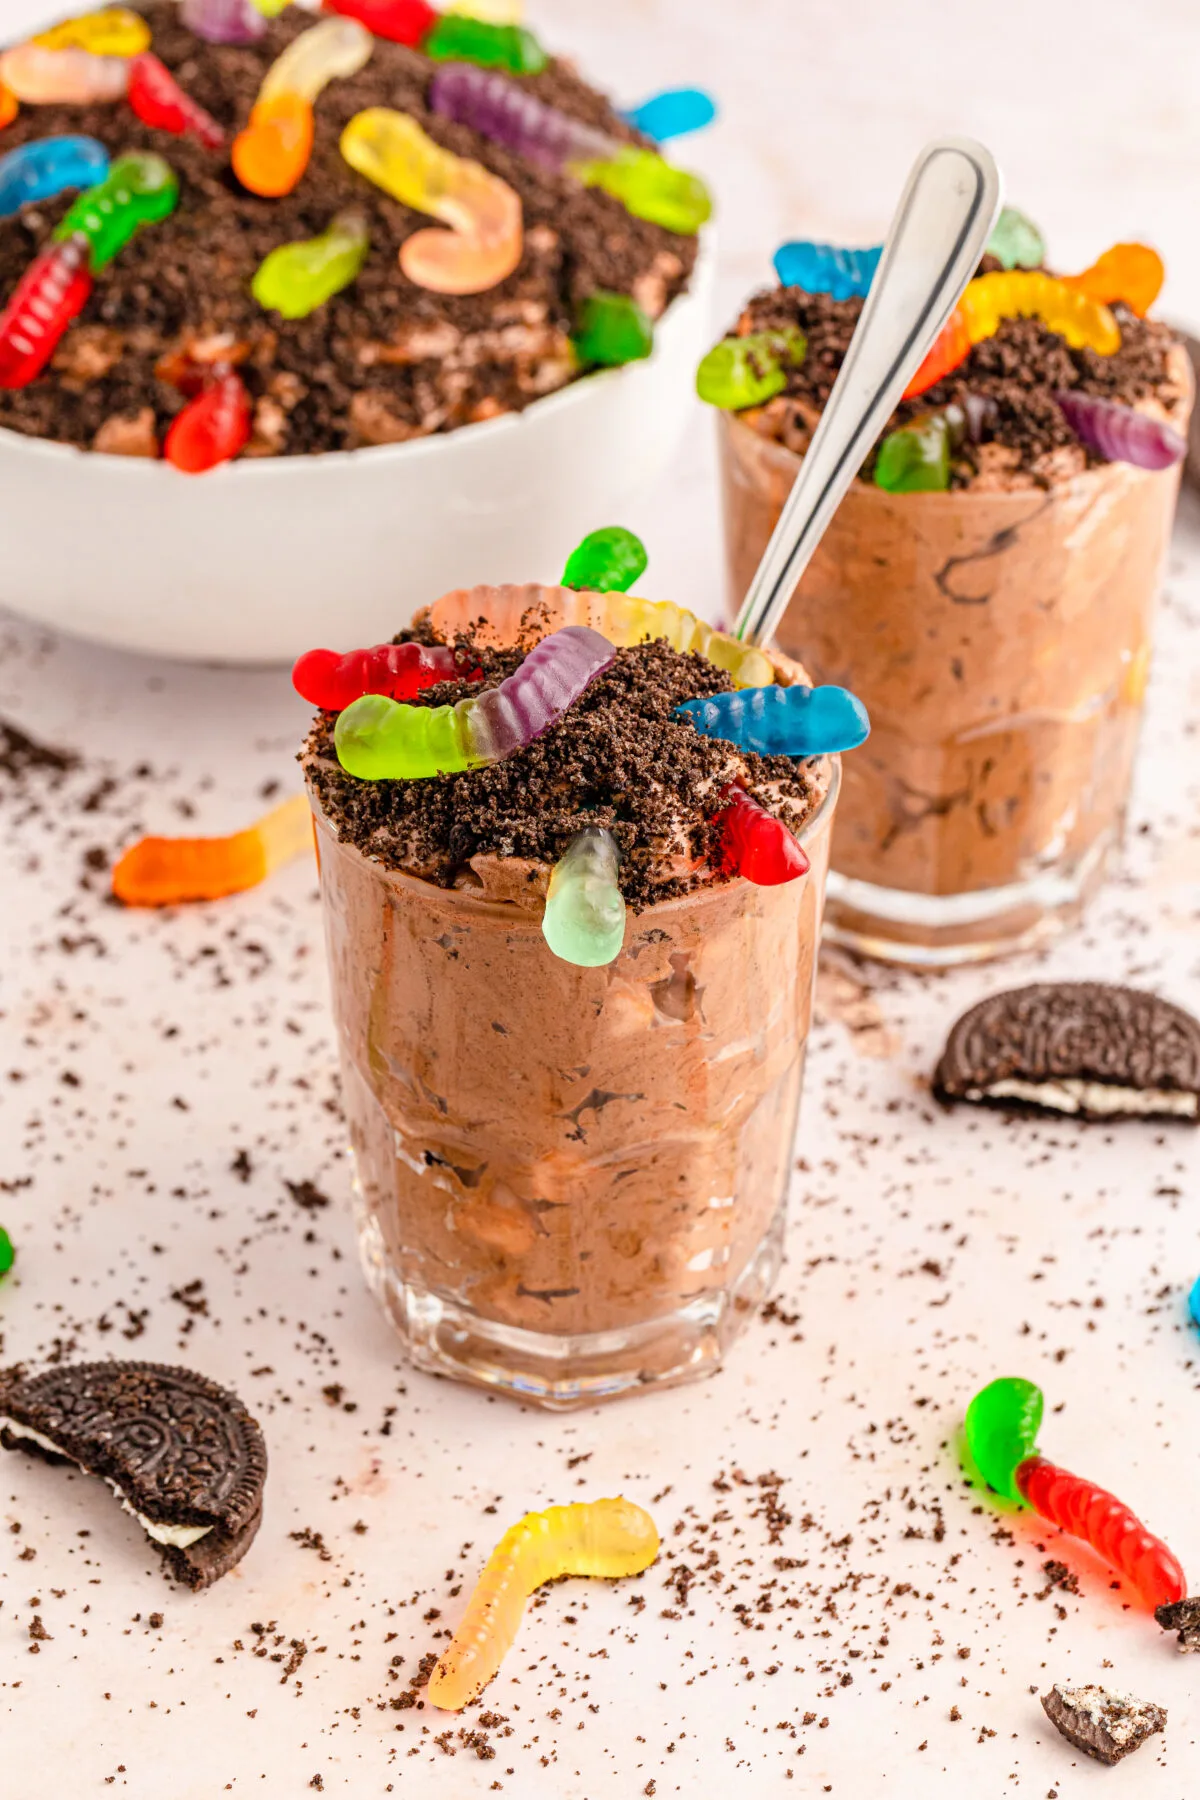 Satisfy your sweet tooth with this delicious and kid-friendly dirt pudding recipe. Perfect for a Halloween treat or an Earth Day celebration!